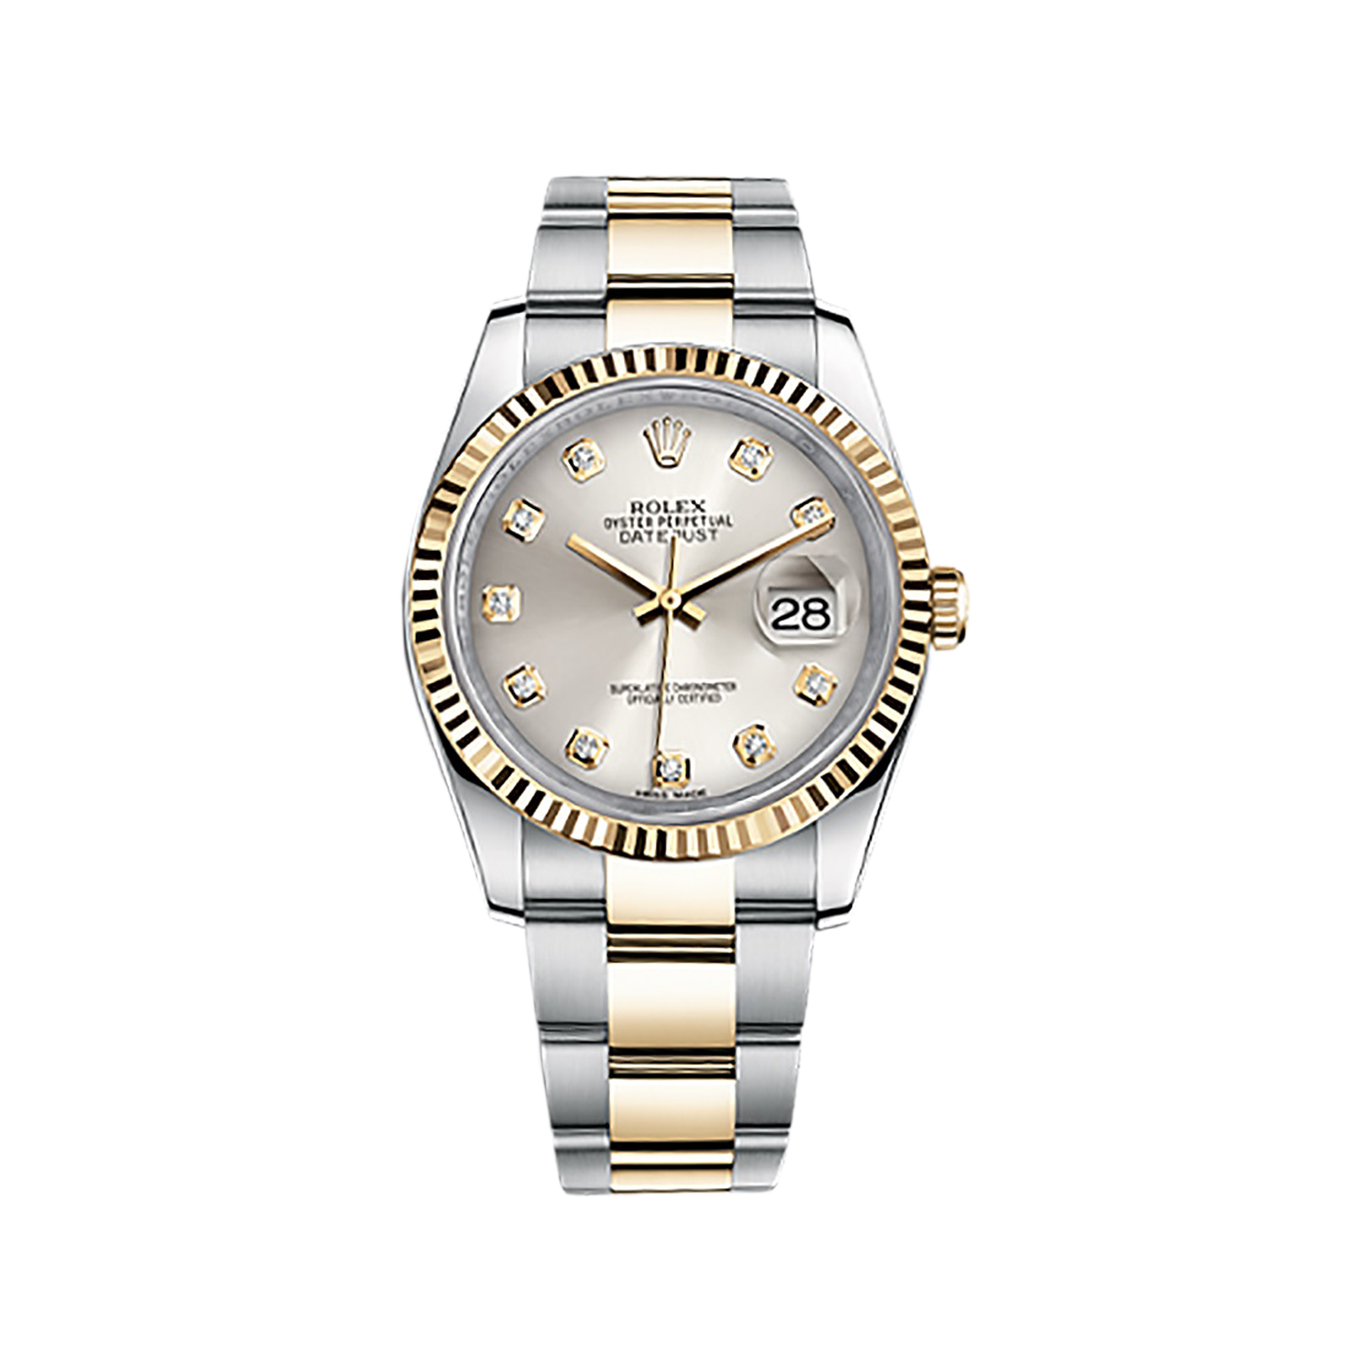 Datejust 36 116233 Gold & Stainless Steel Watch (Silver Set with Diamonds) - Click Image to Close